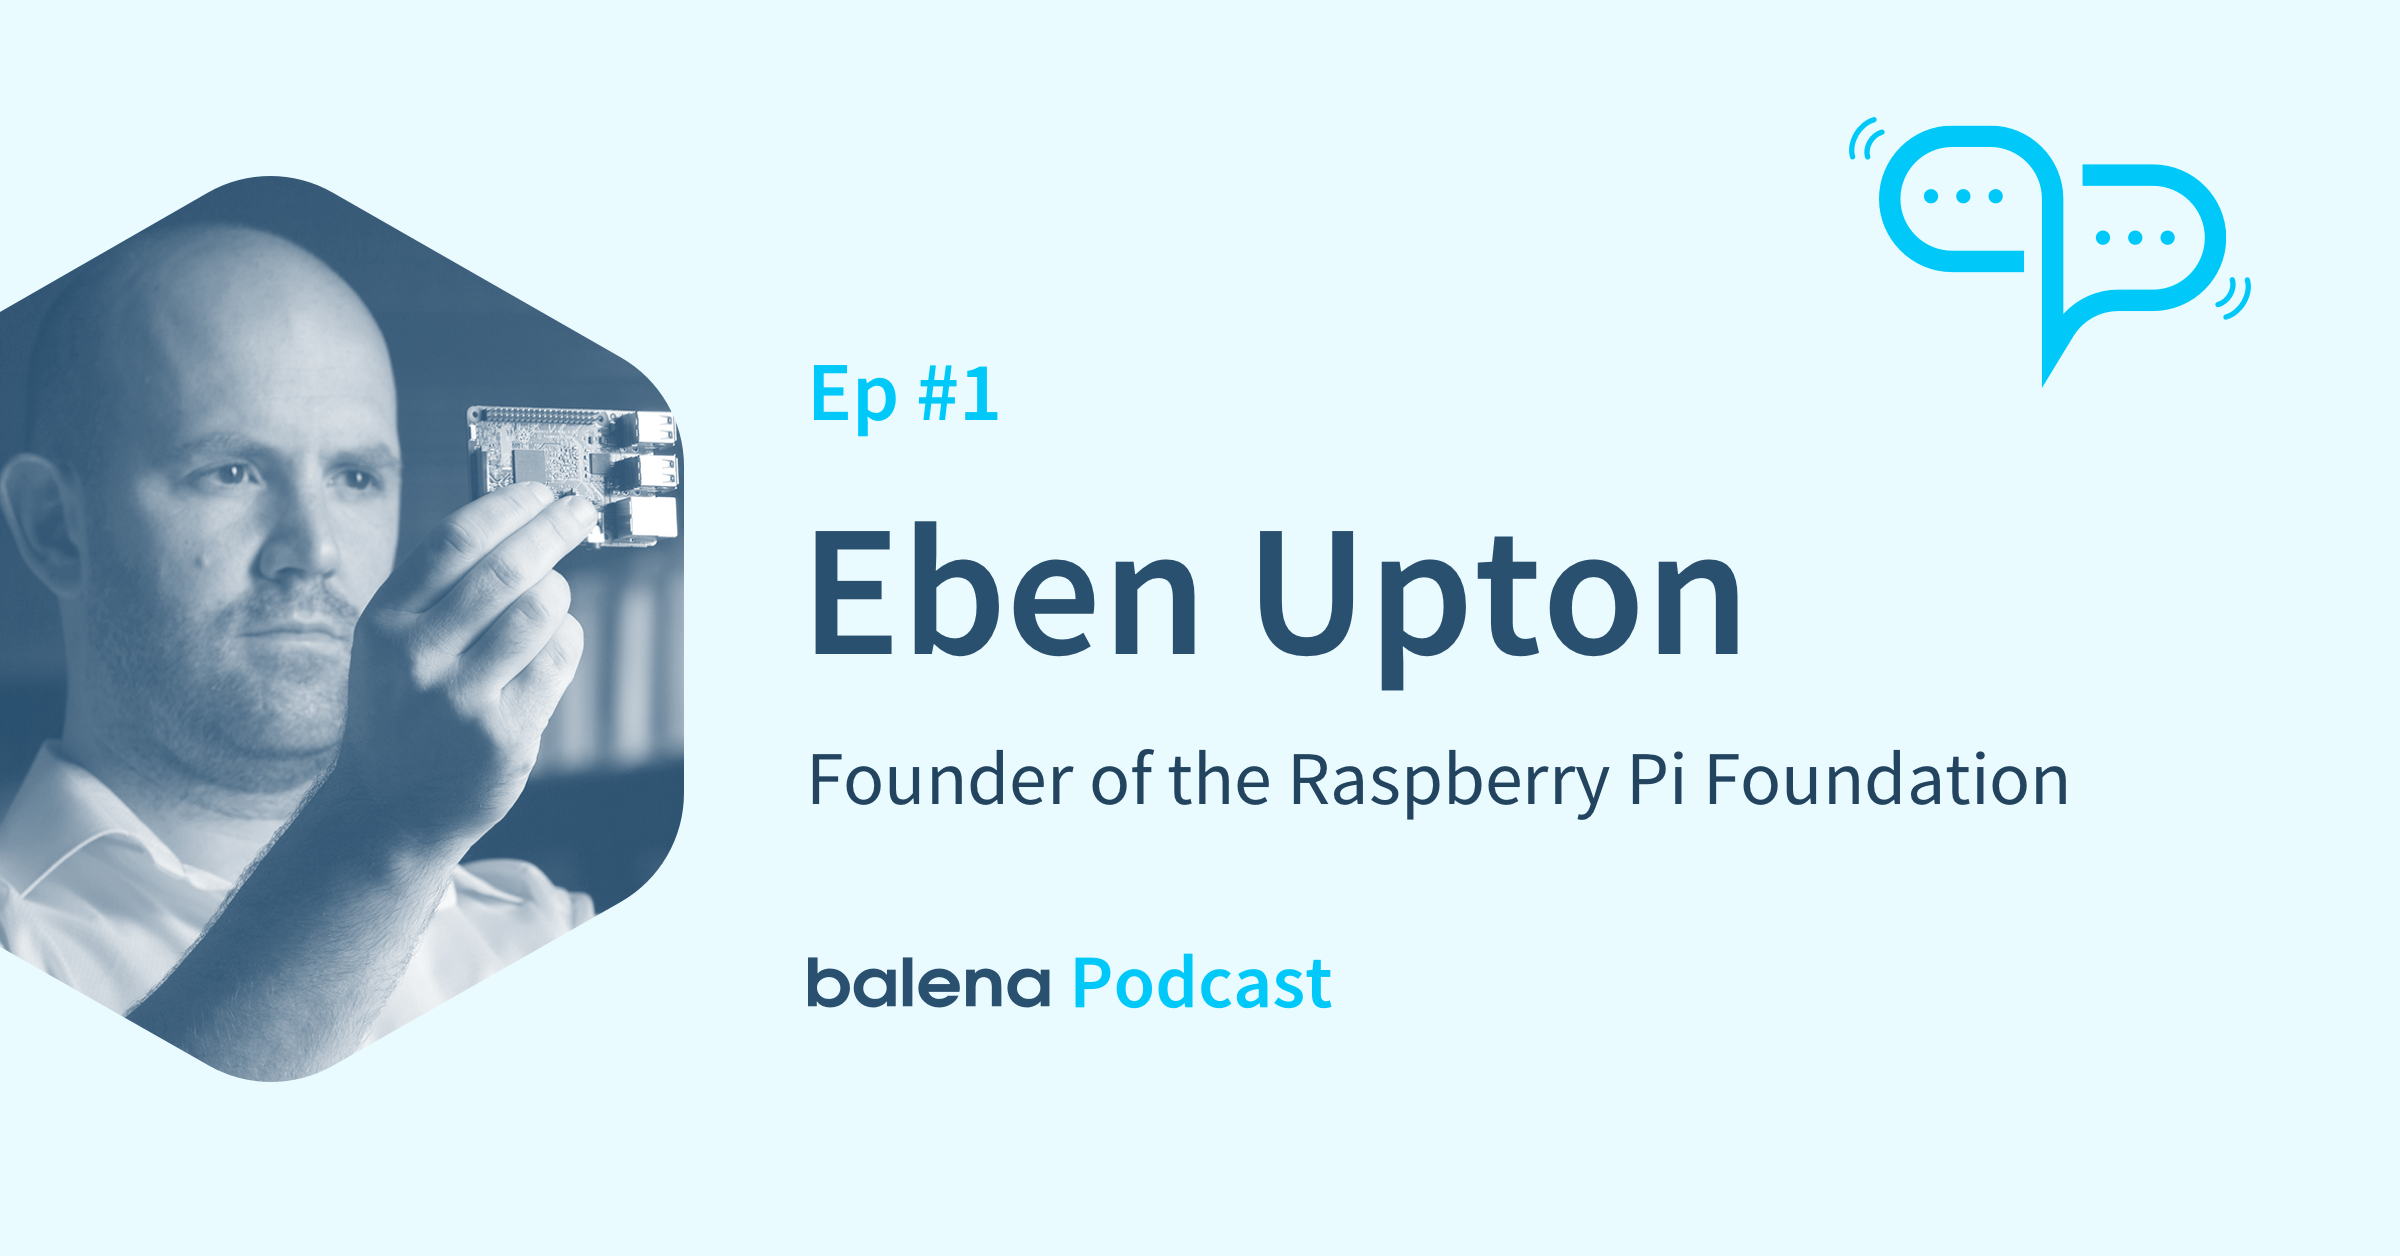 Introducing balenaPodcast, an interview with Eben Upton, Founder of the Raspberry Pi Foundation